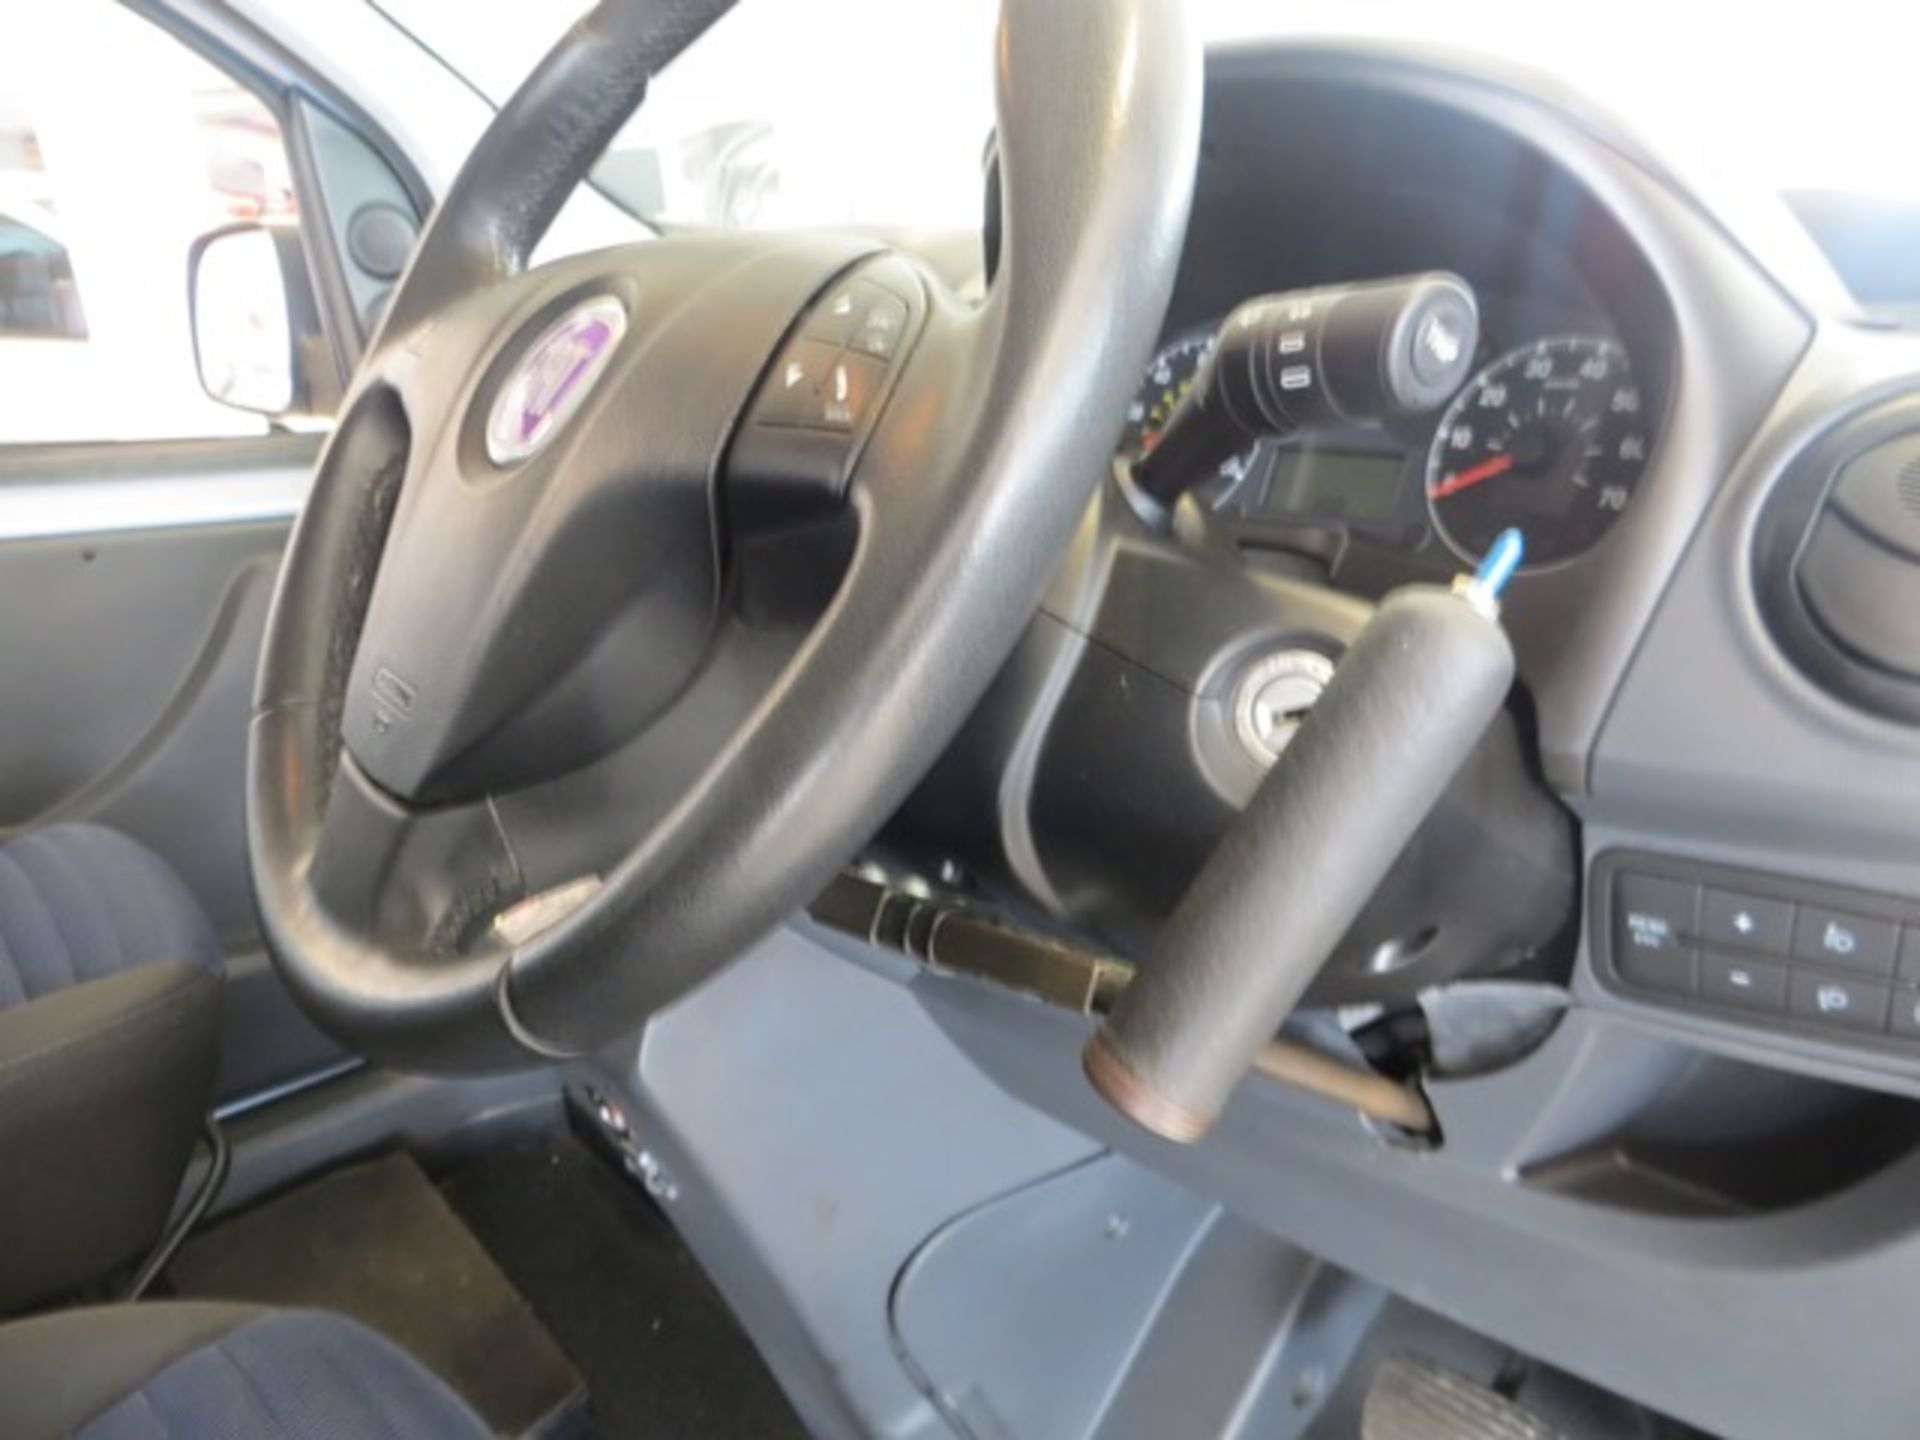 Fiat Qubo with Sirus drive / passenger from wheel chair conversion Dynamic Multijet diesel auto - Image 10 of 11